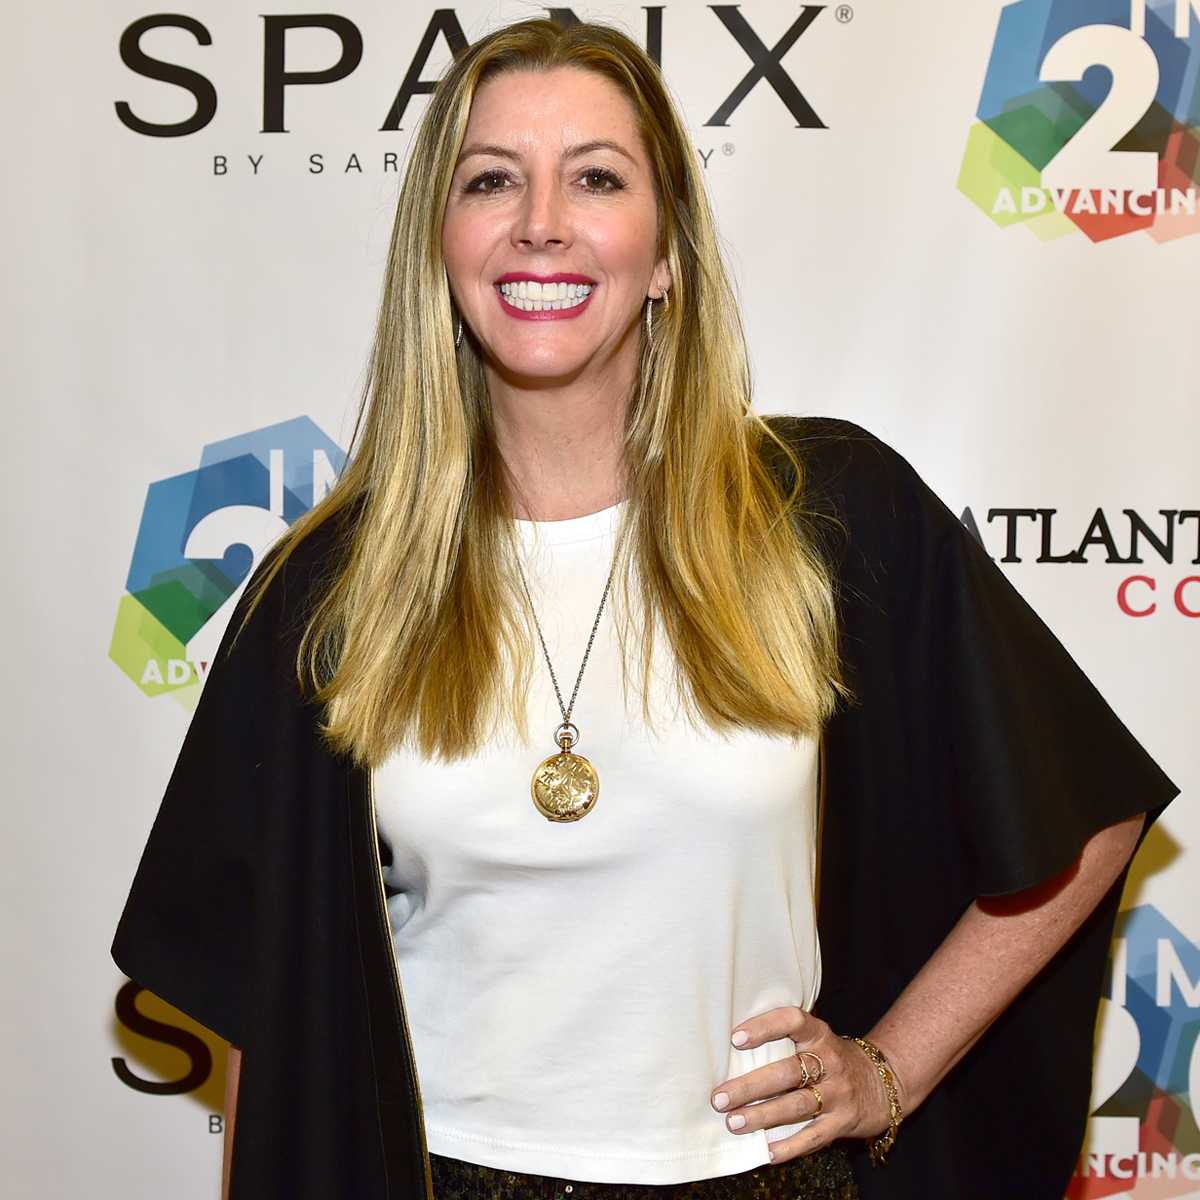 Spanx founder Sara Blakely loans out her wedding dress to strangers